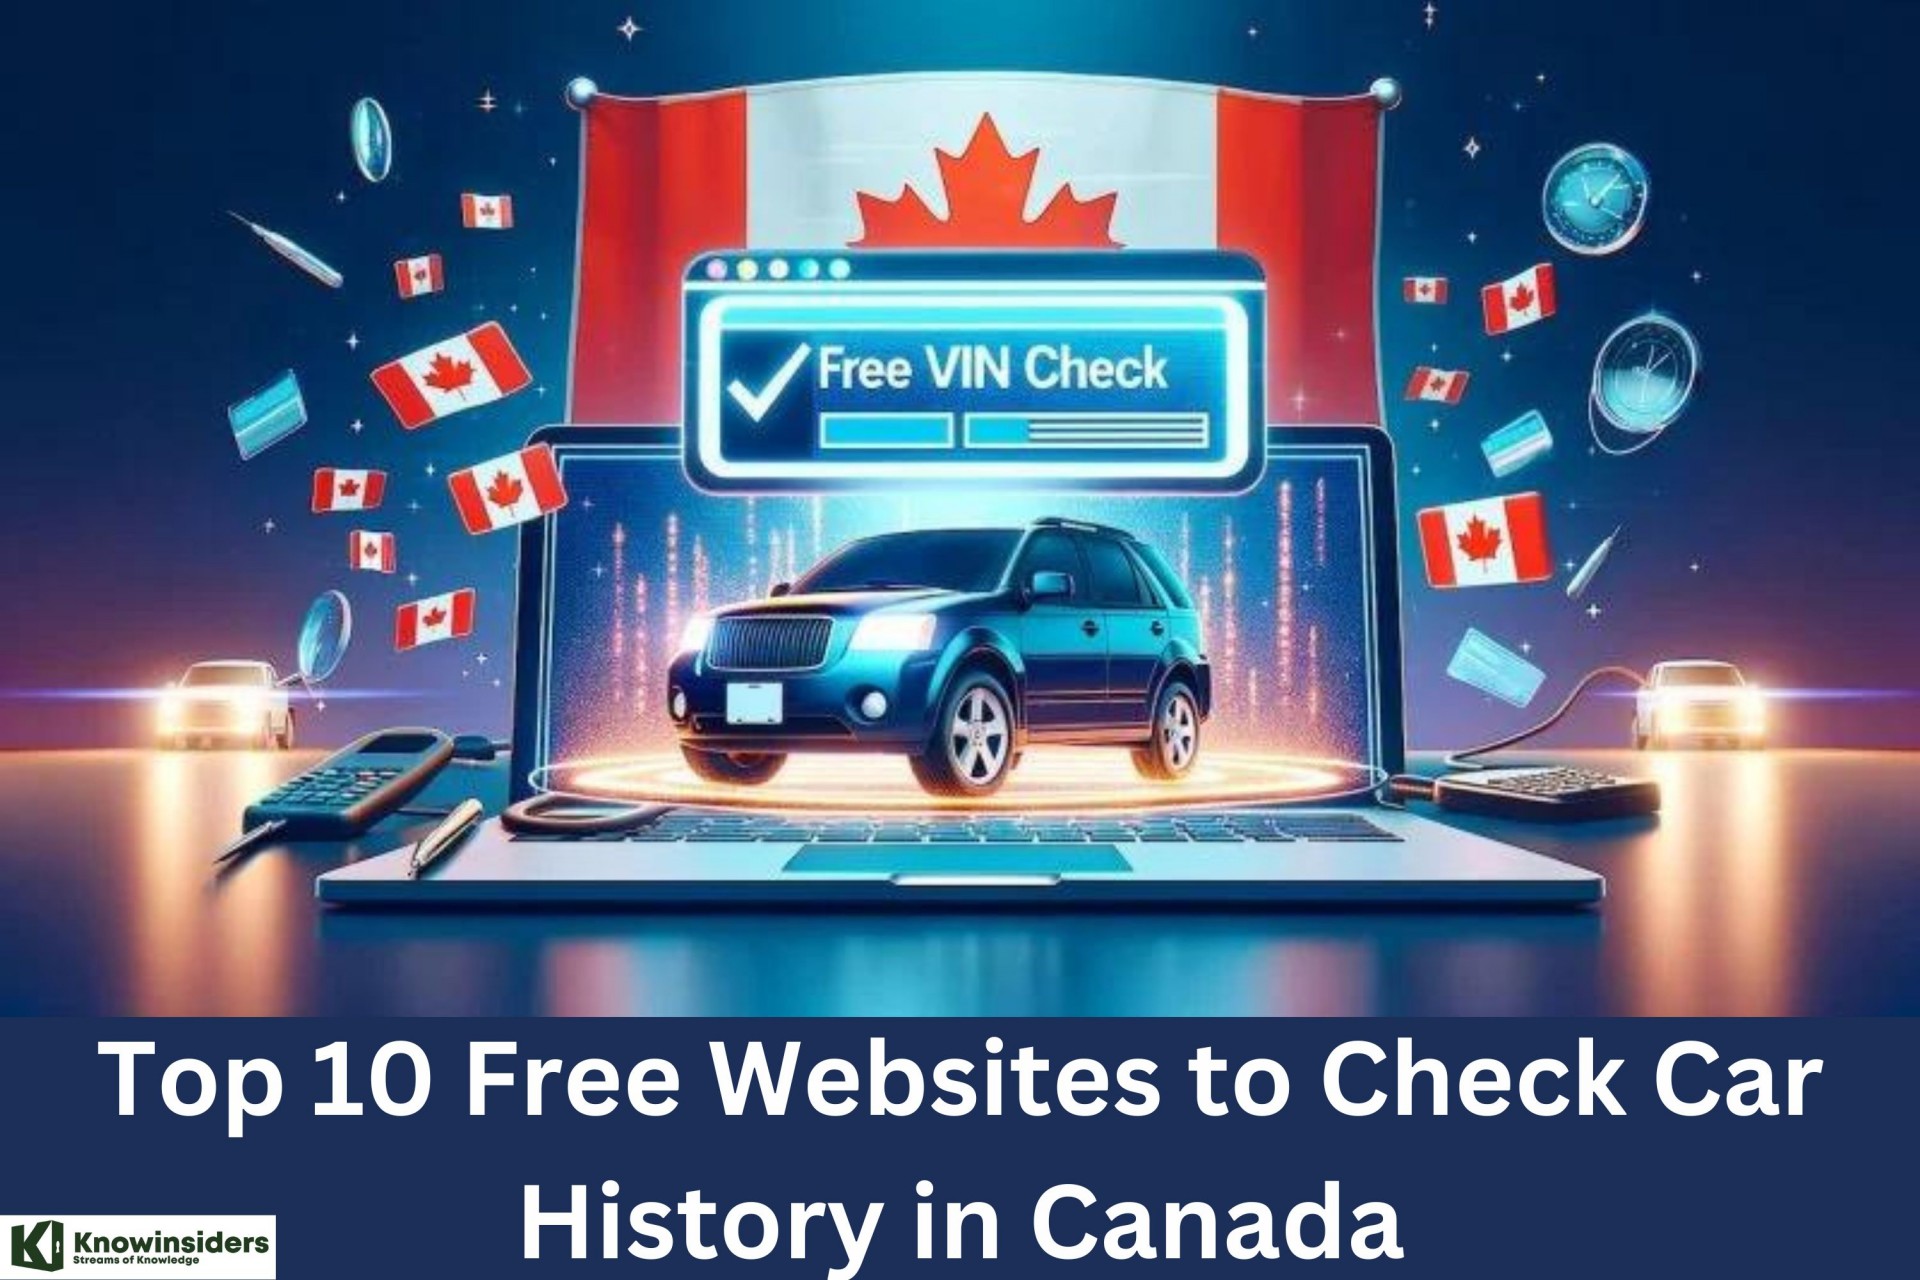 How Check A Car History in Canada - 10 Best Free Sites to Find the VIN